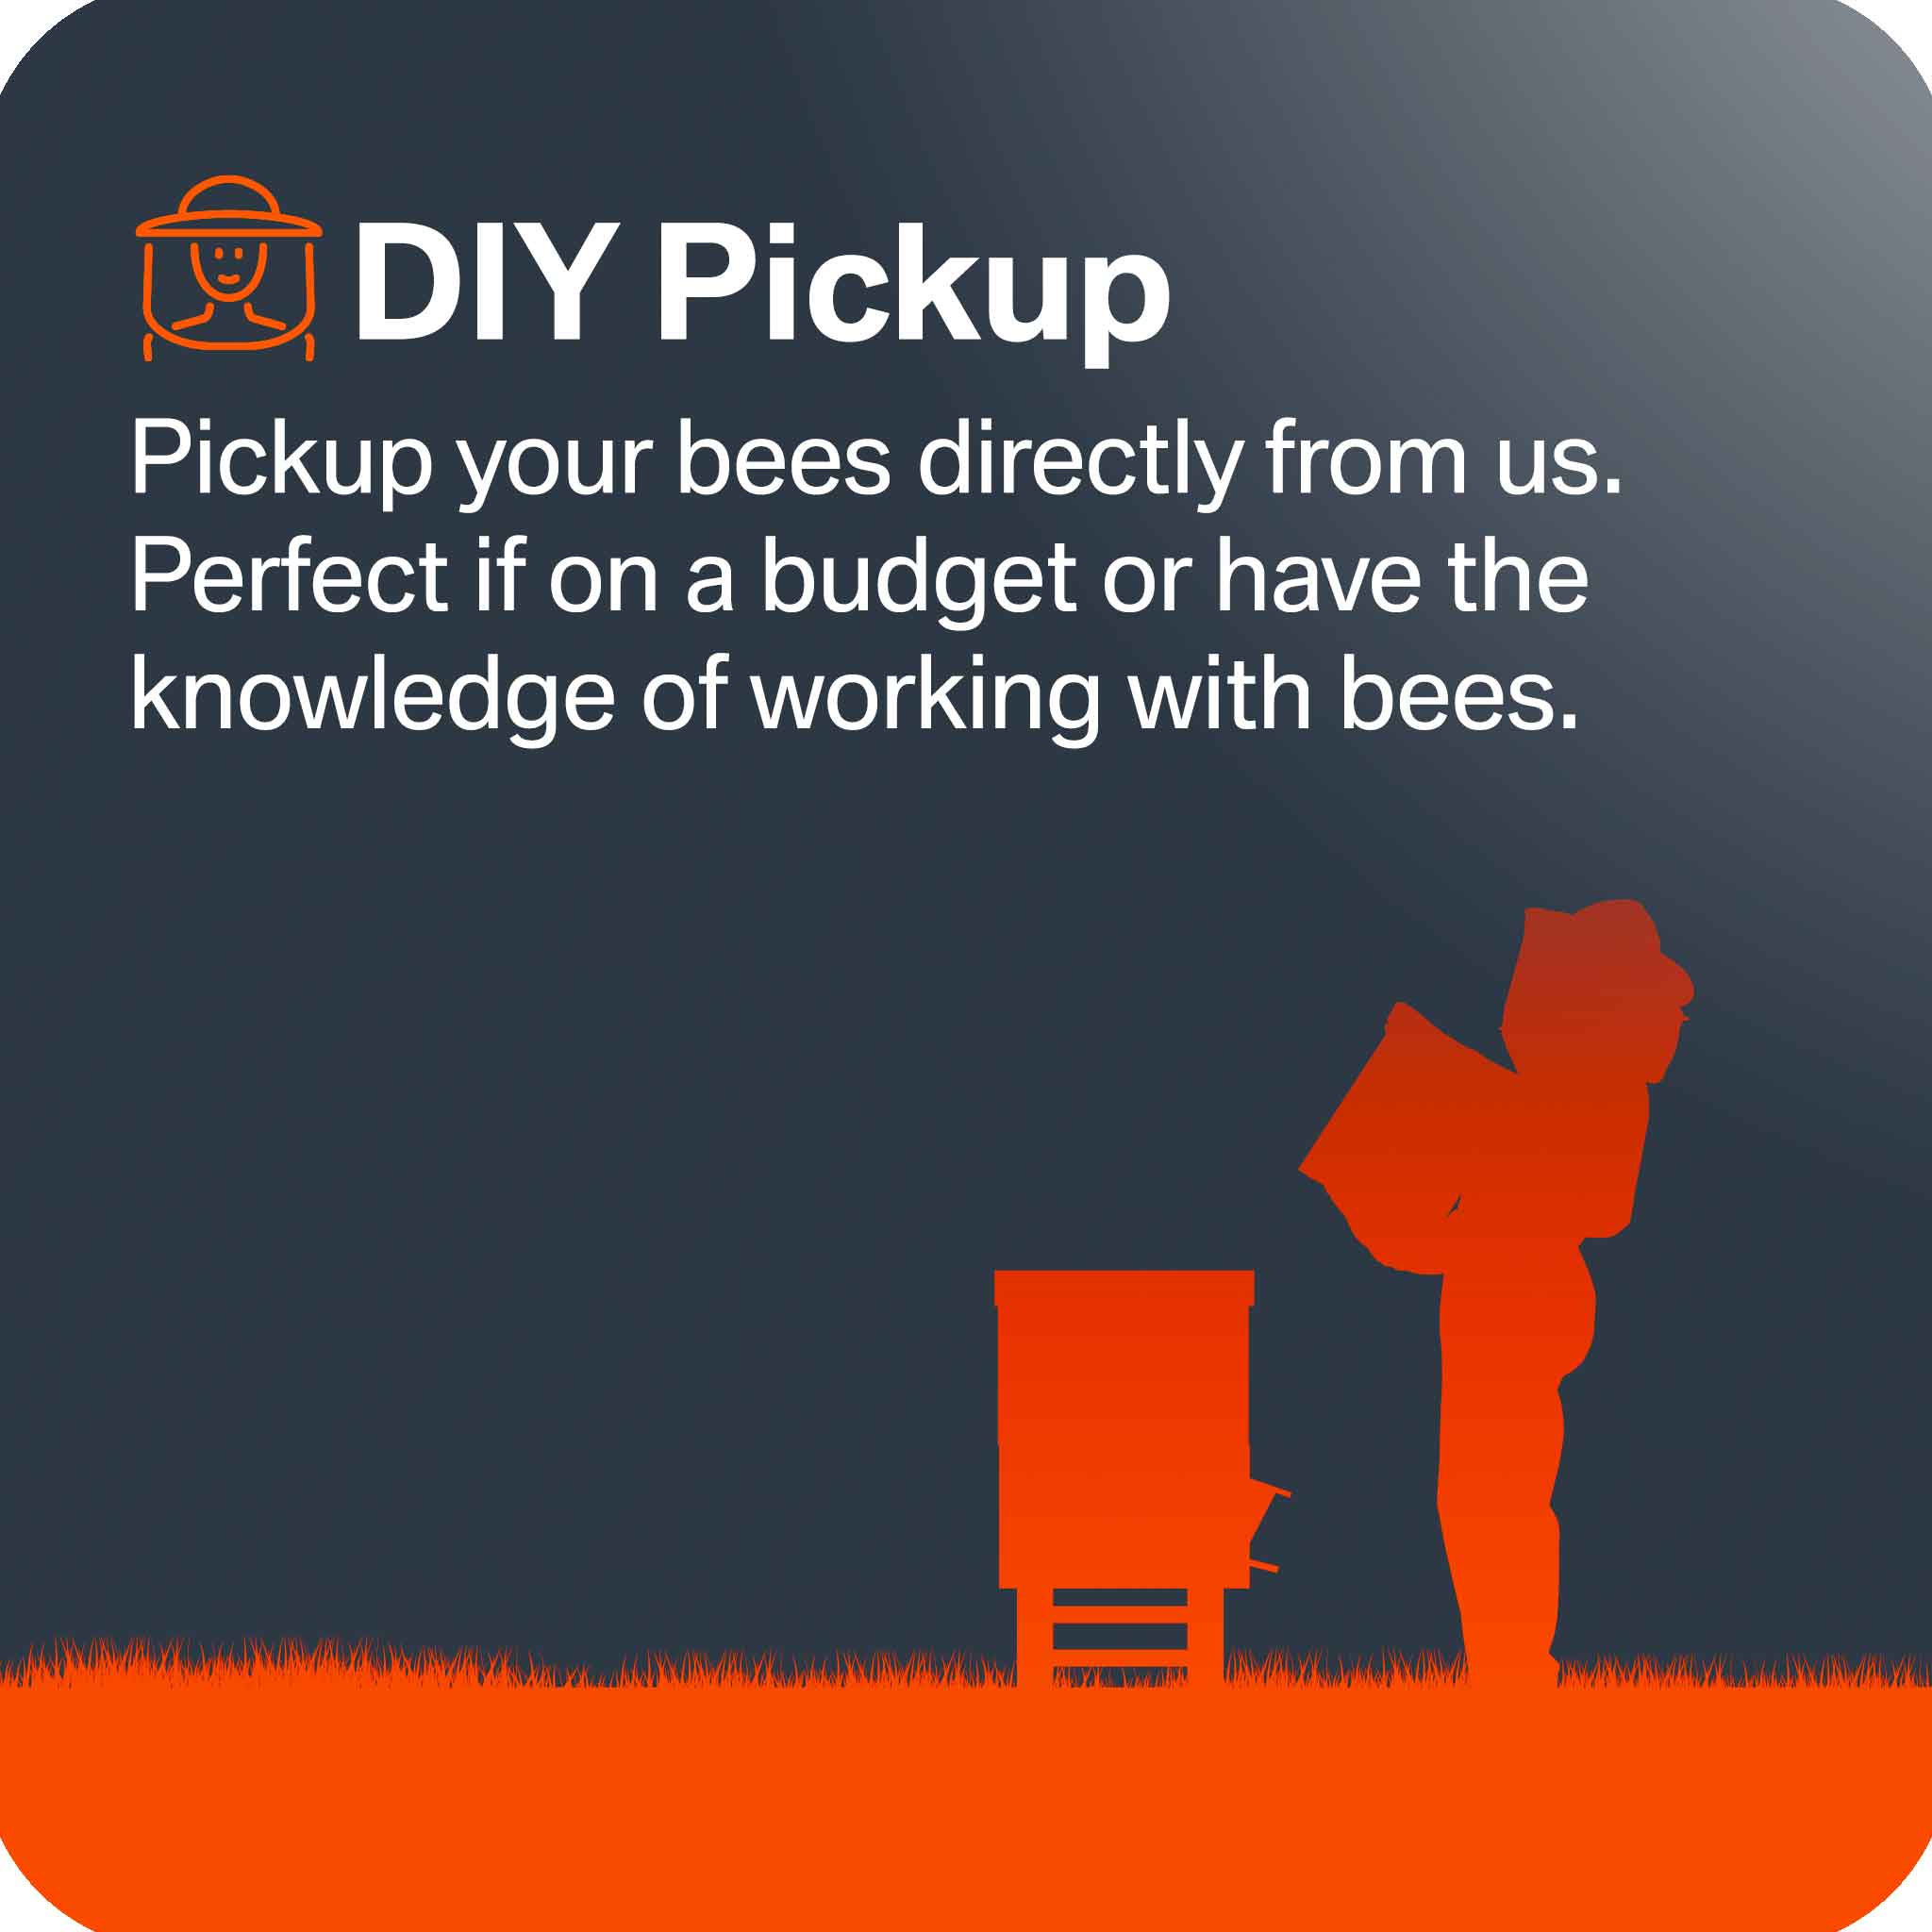 Bees for Sale - DIY Pickup - Bees collection by Buzzbee Beekeeping Supplies